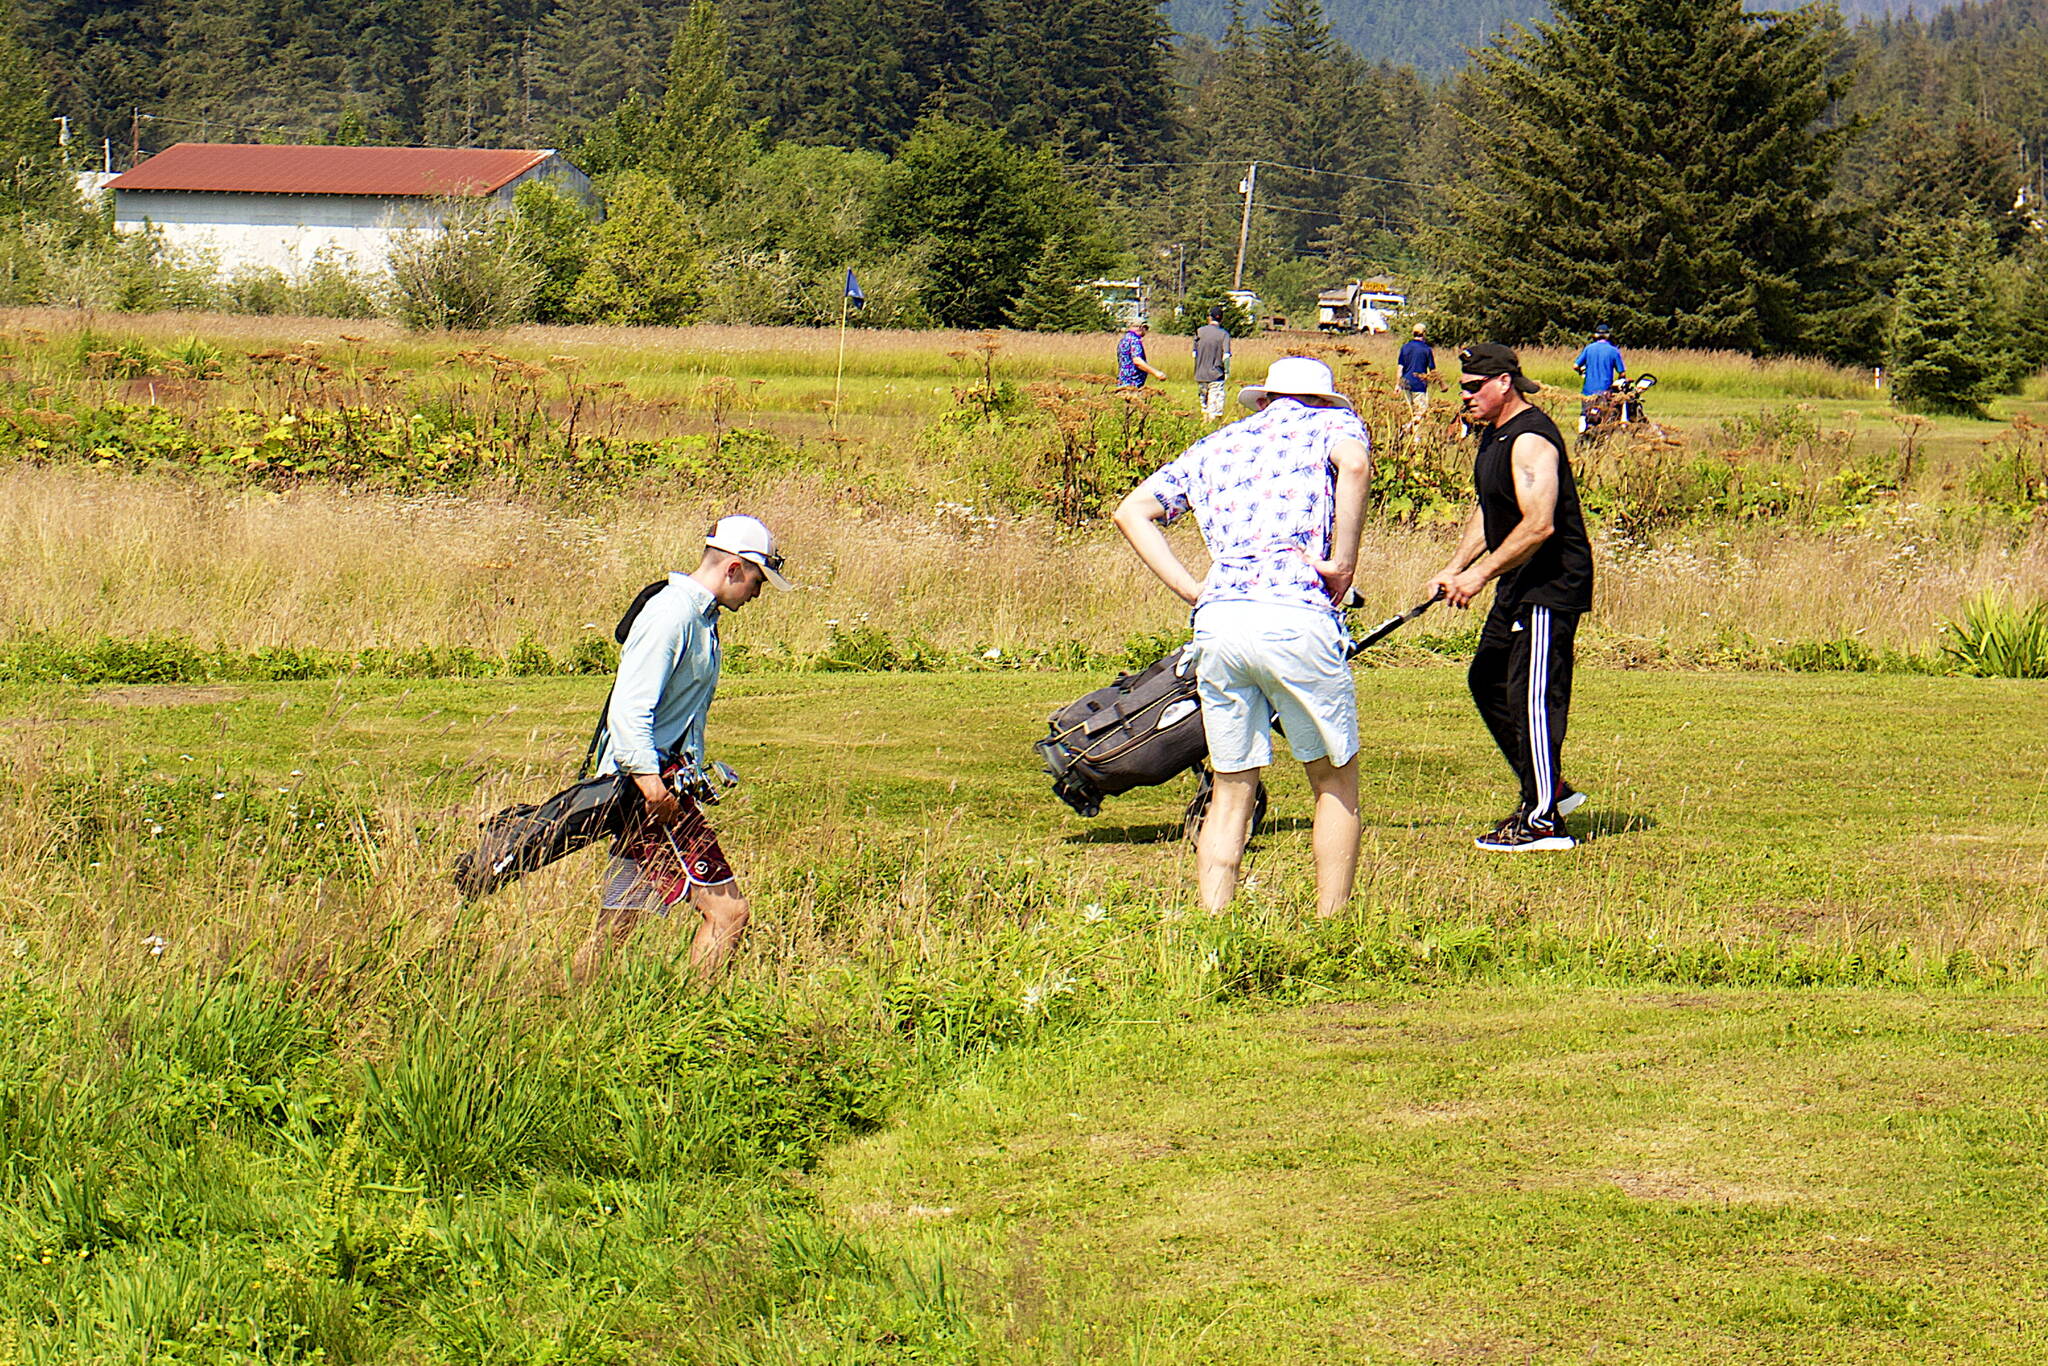 Dylan Williams (left), Matt Seymour (center) and Mark Wendling look for their balls in the rough at the seventh hole of the Annual Greater Juneau Chamber of Commerce Golf Classic on Saturday at the Mendenhall Golf Course. (Mark Sabbatini / Juneau Empire)